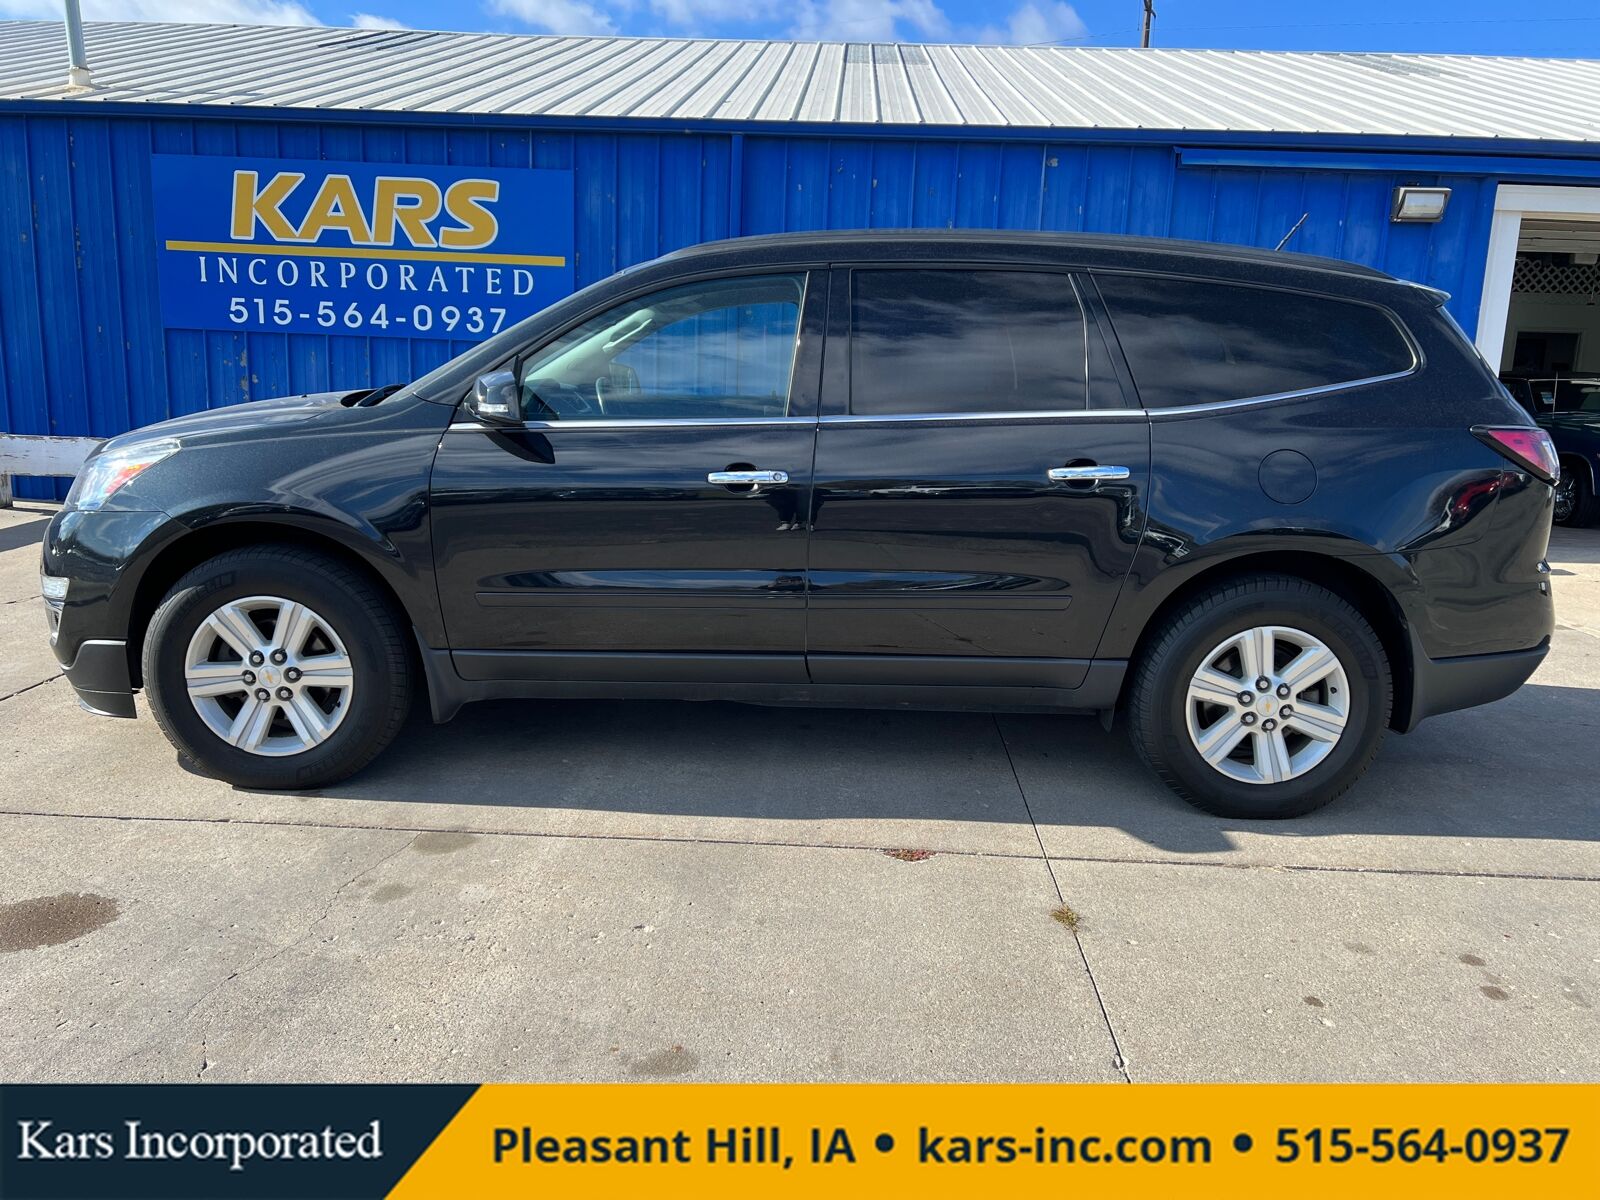 2013 Chevrolet Traverse  - Kars Incorporated